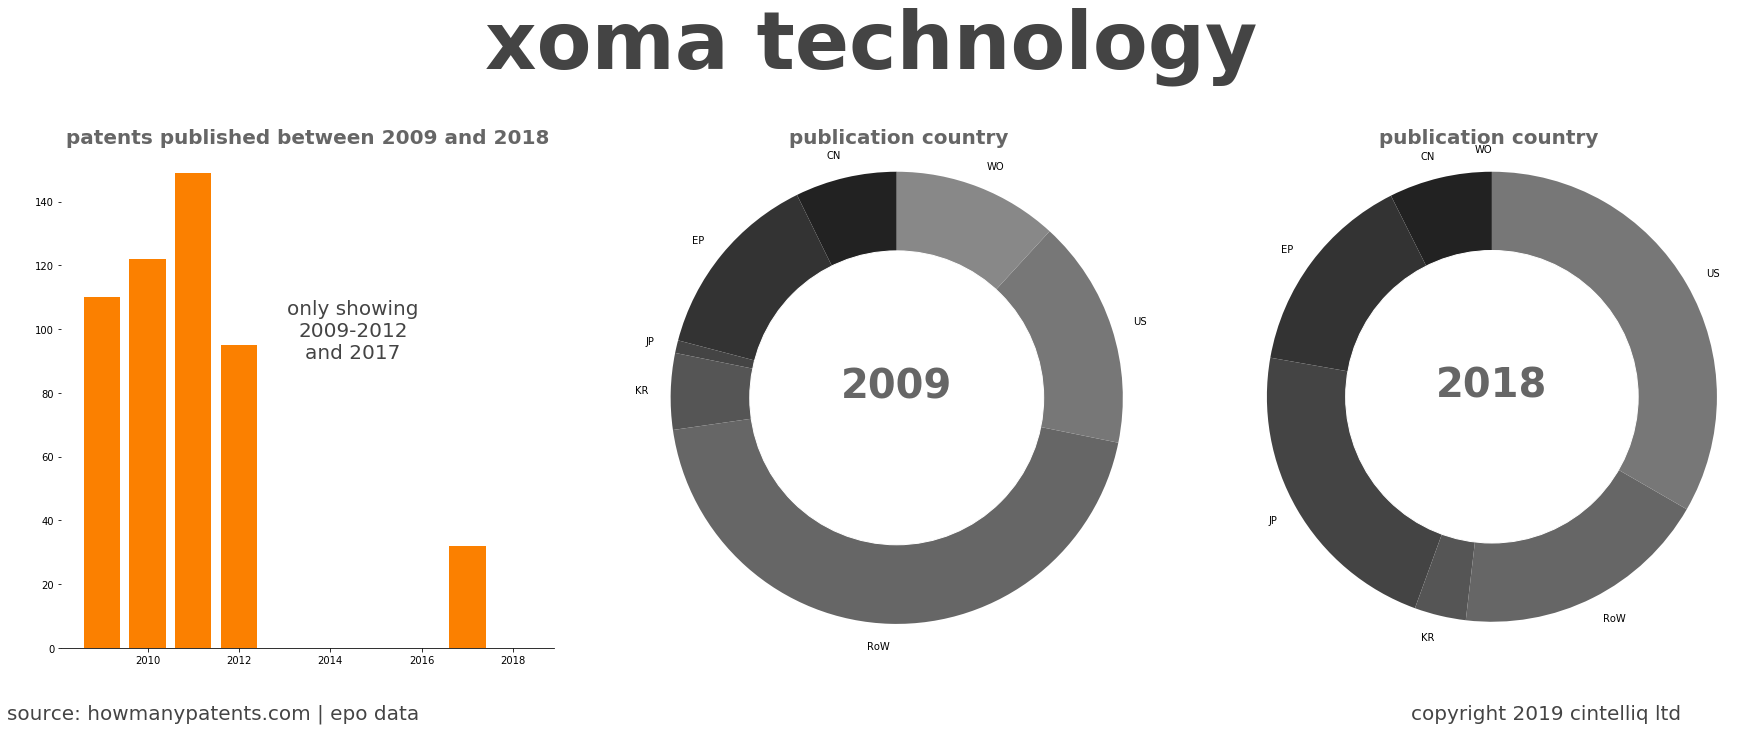 summary of patents for Xoma Technology